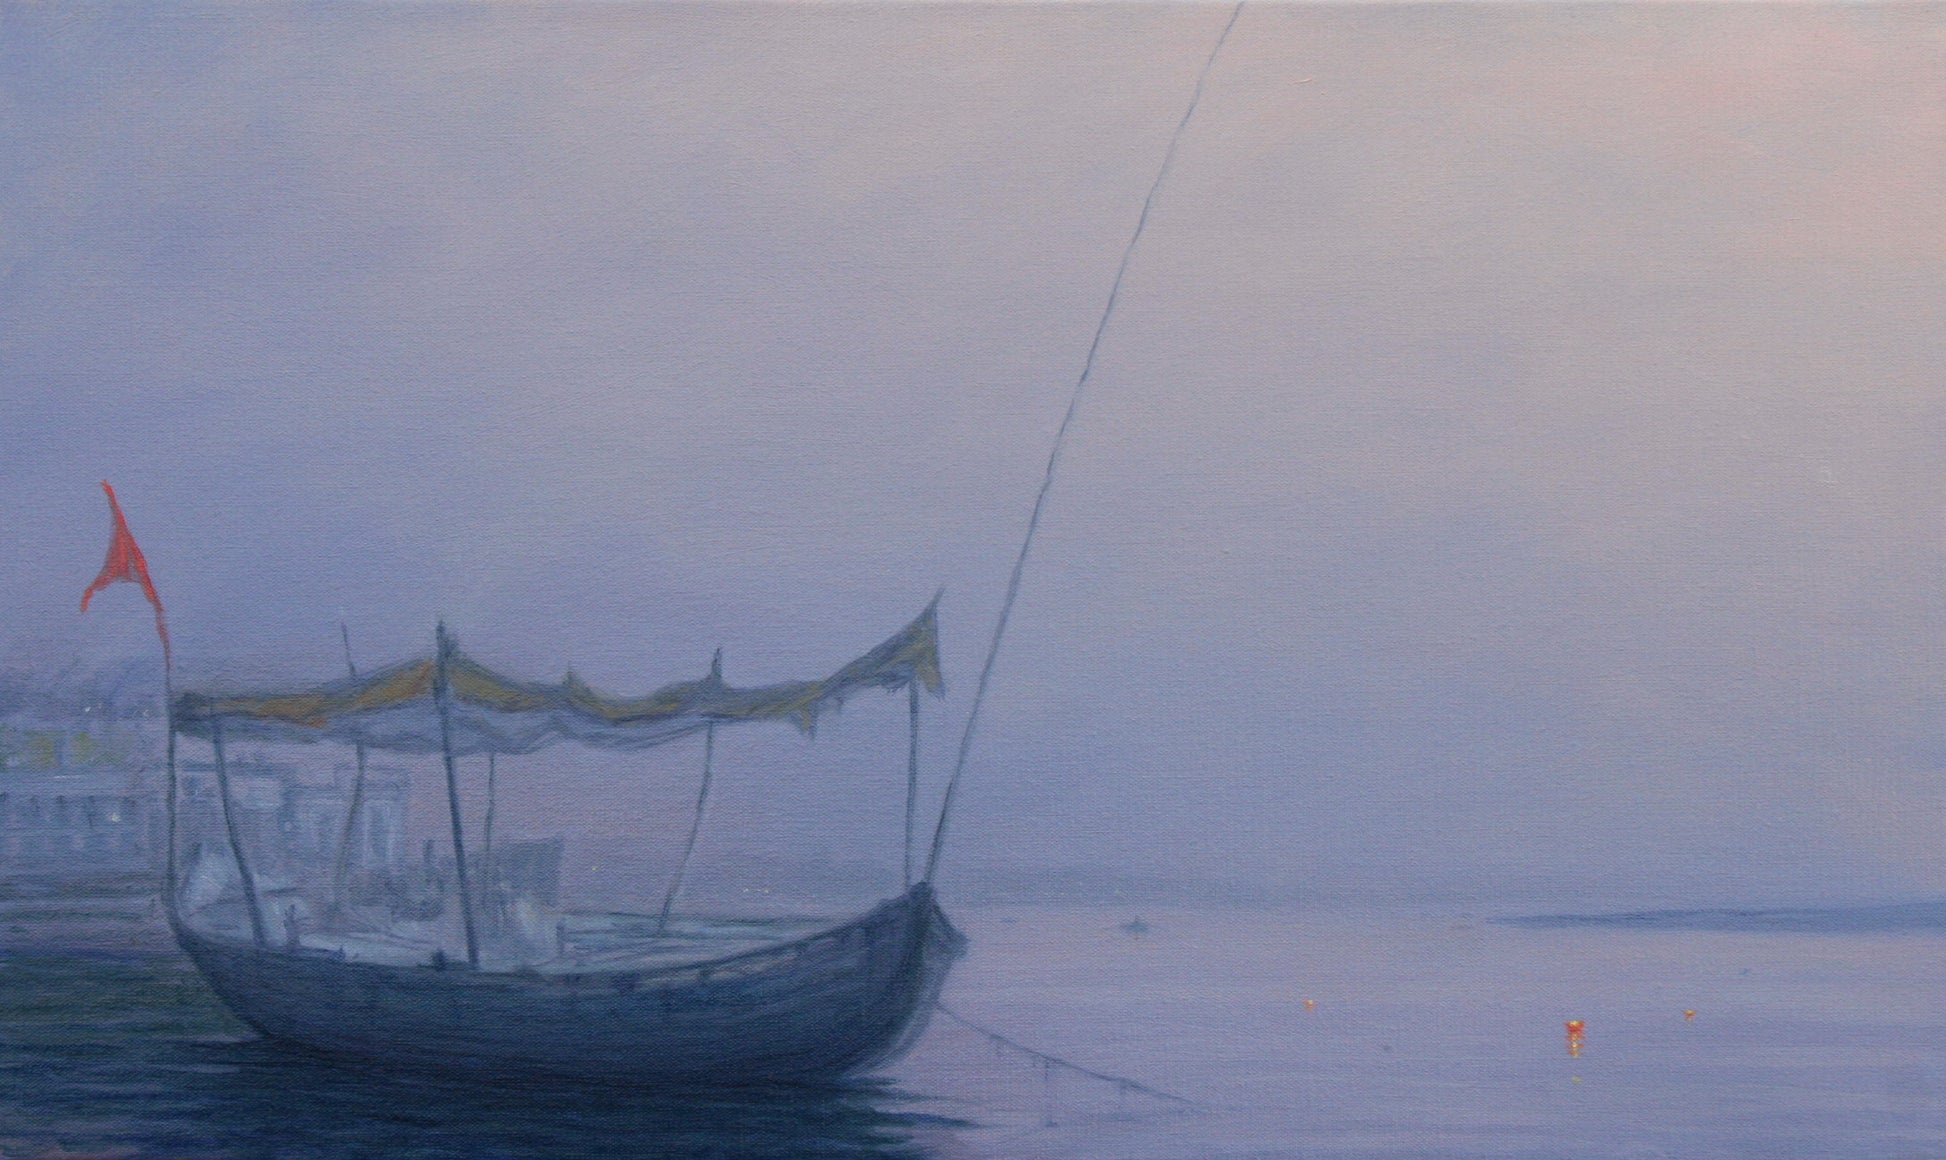 Prayer Candles On The Ganges.  30 x 18 Ins. Seascape painting by Derek Hare